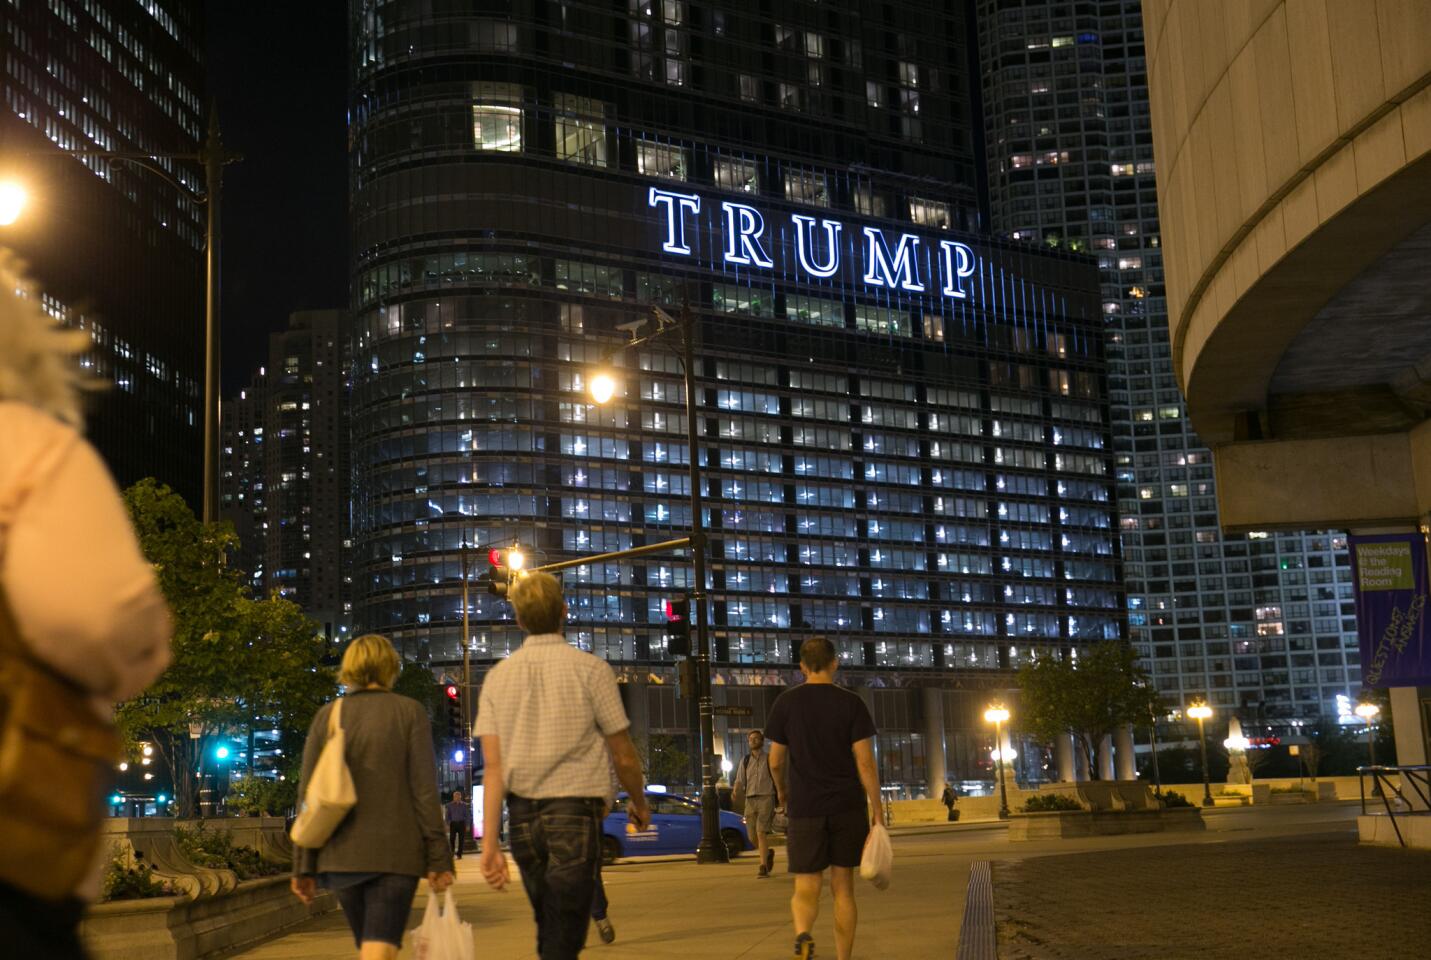 L. Dick Buell, retired CEO of St. Petersburg, Fla.-based Catalina Marketing paid $3.36 million to buy a three-bedroom, 79th-floor condominium in Trump International Hotel & Tower in downtown Chicago from personal-injury attorney Patrick Salvi.